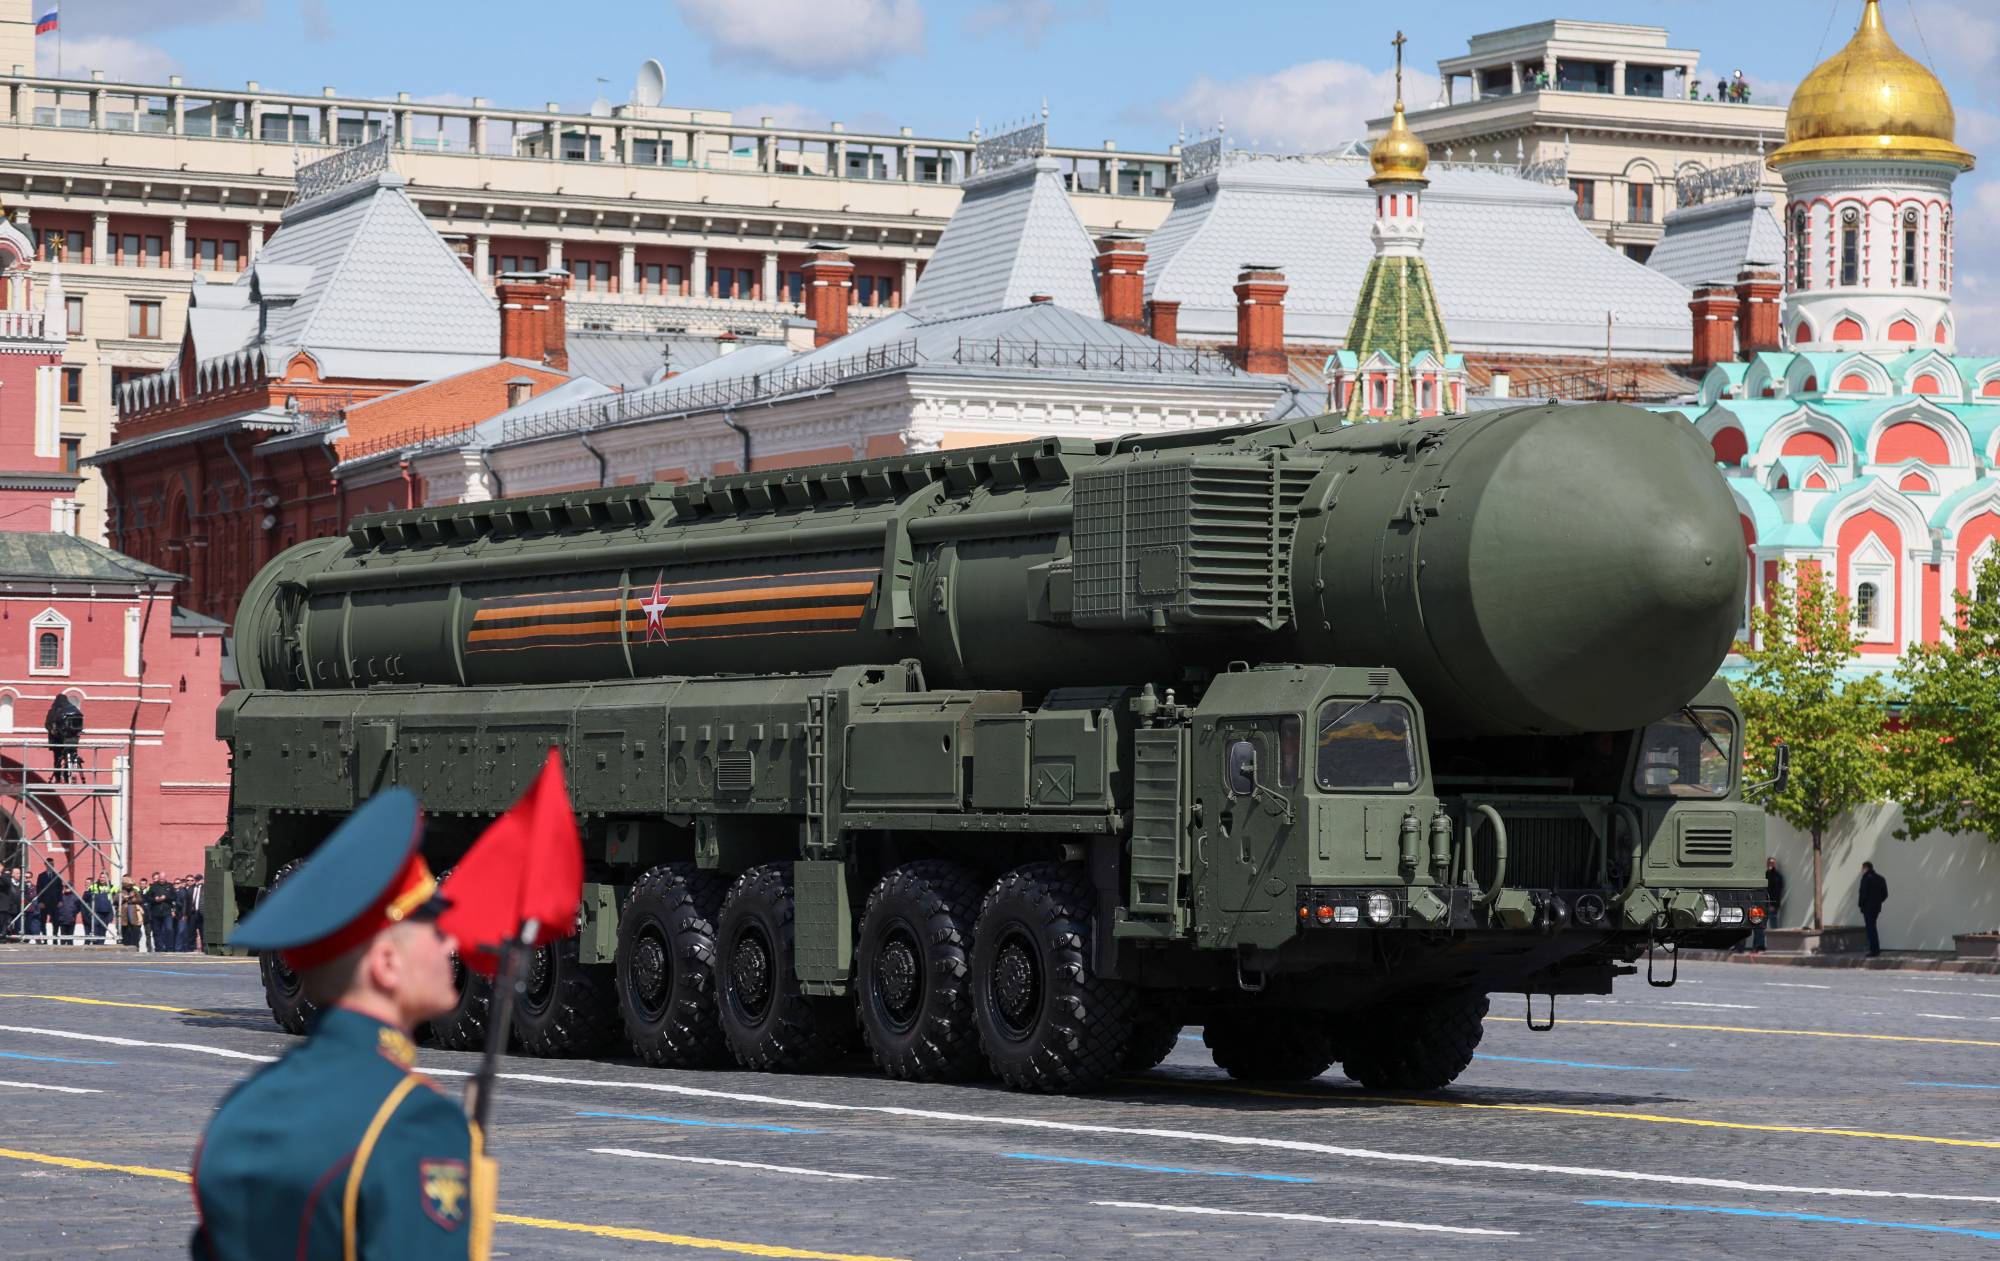 An intercontinental ballistic missile system drives in Red Square during a military parade in Moscow on May 9.  | SPUTNIK / POOL / VIA REUTERS